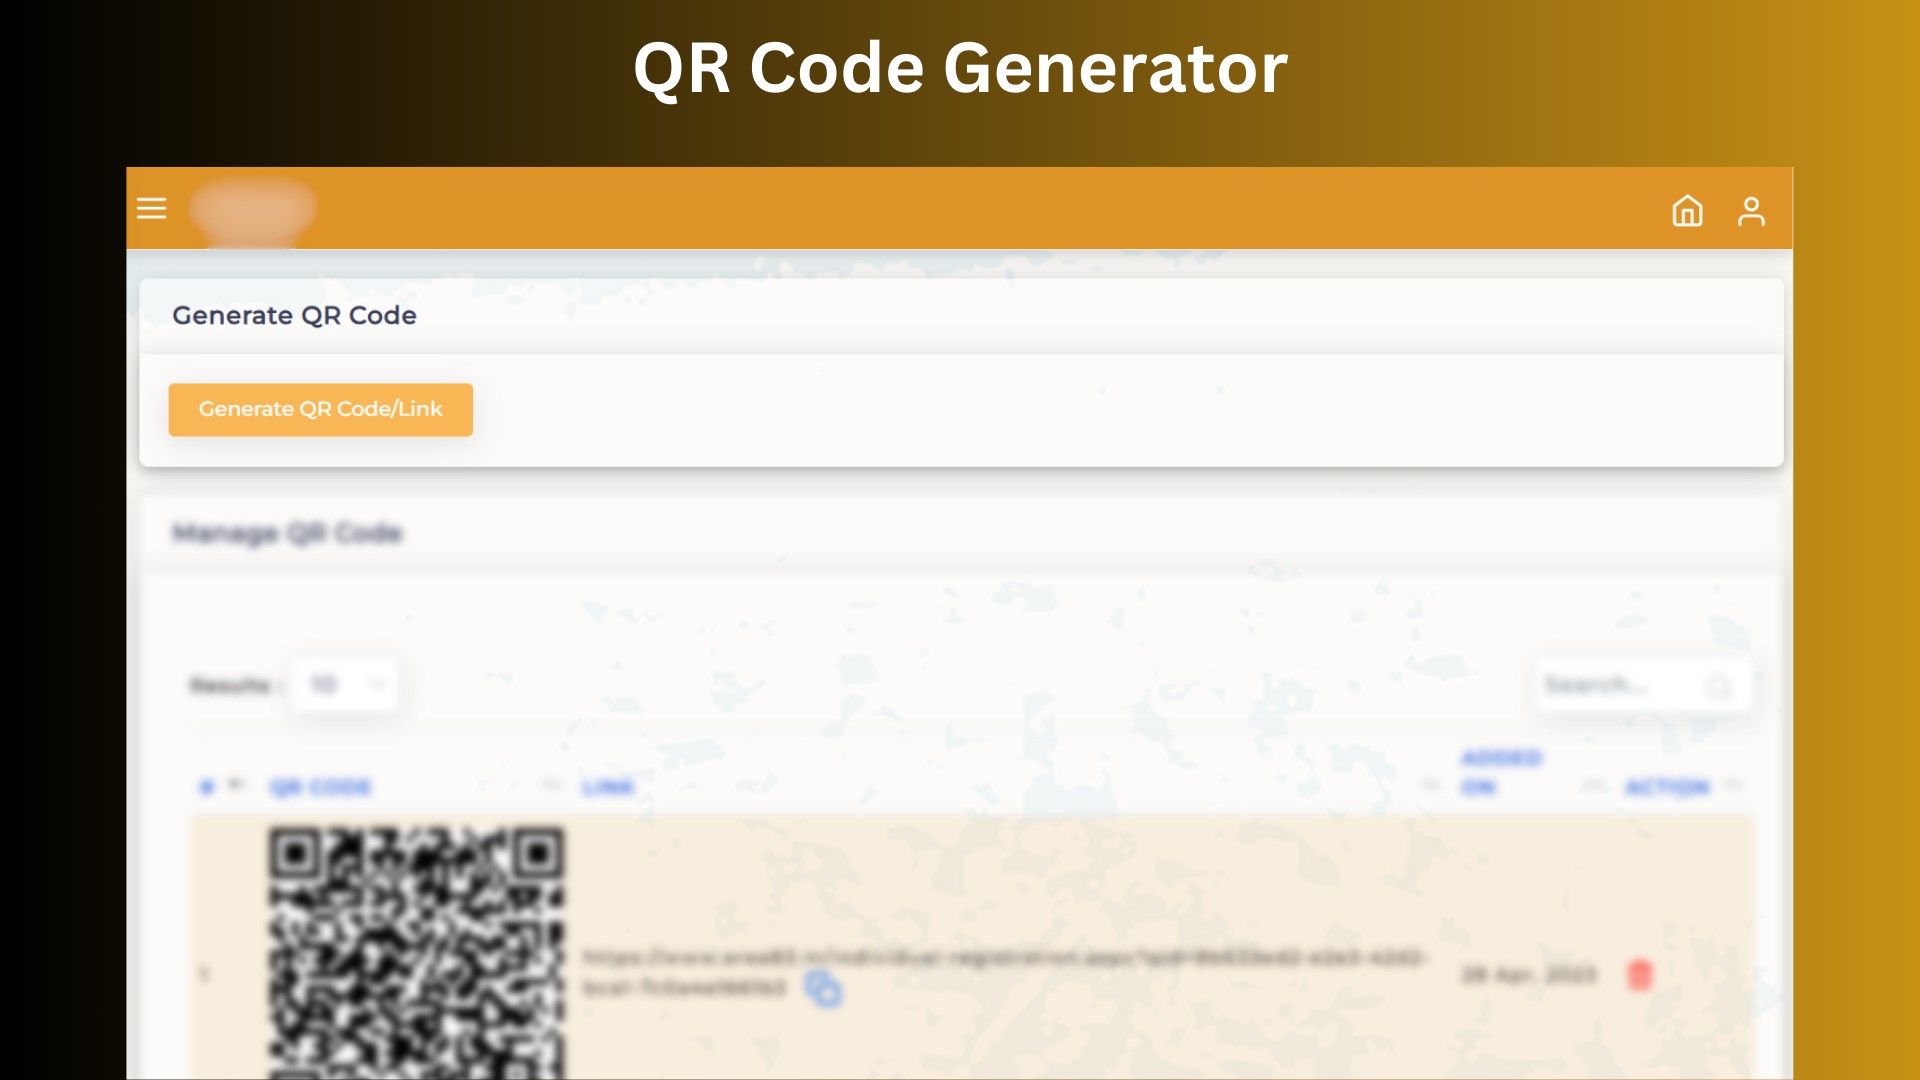 Developed a QR code generator feature that generates a unique link where users can input their booking ID. This link enables individuals to enter their details individually using the same booking ID. Upon completing the details, each user receives a personalized QR code which will be scanned at the resort to grant access.